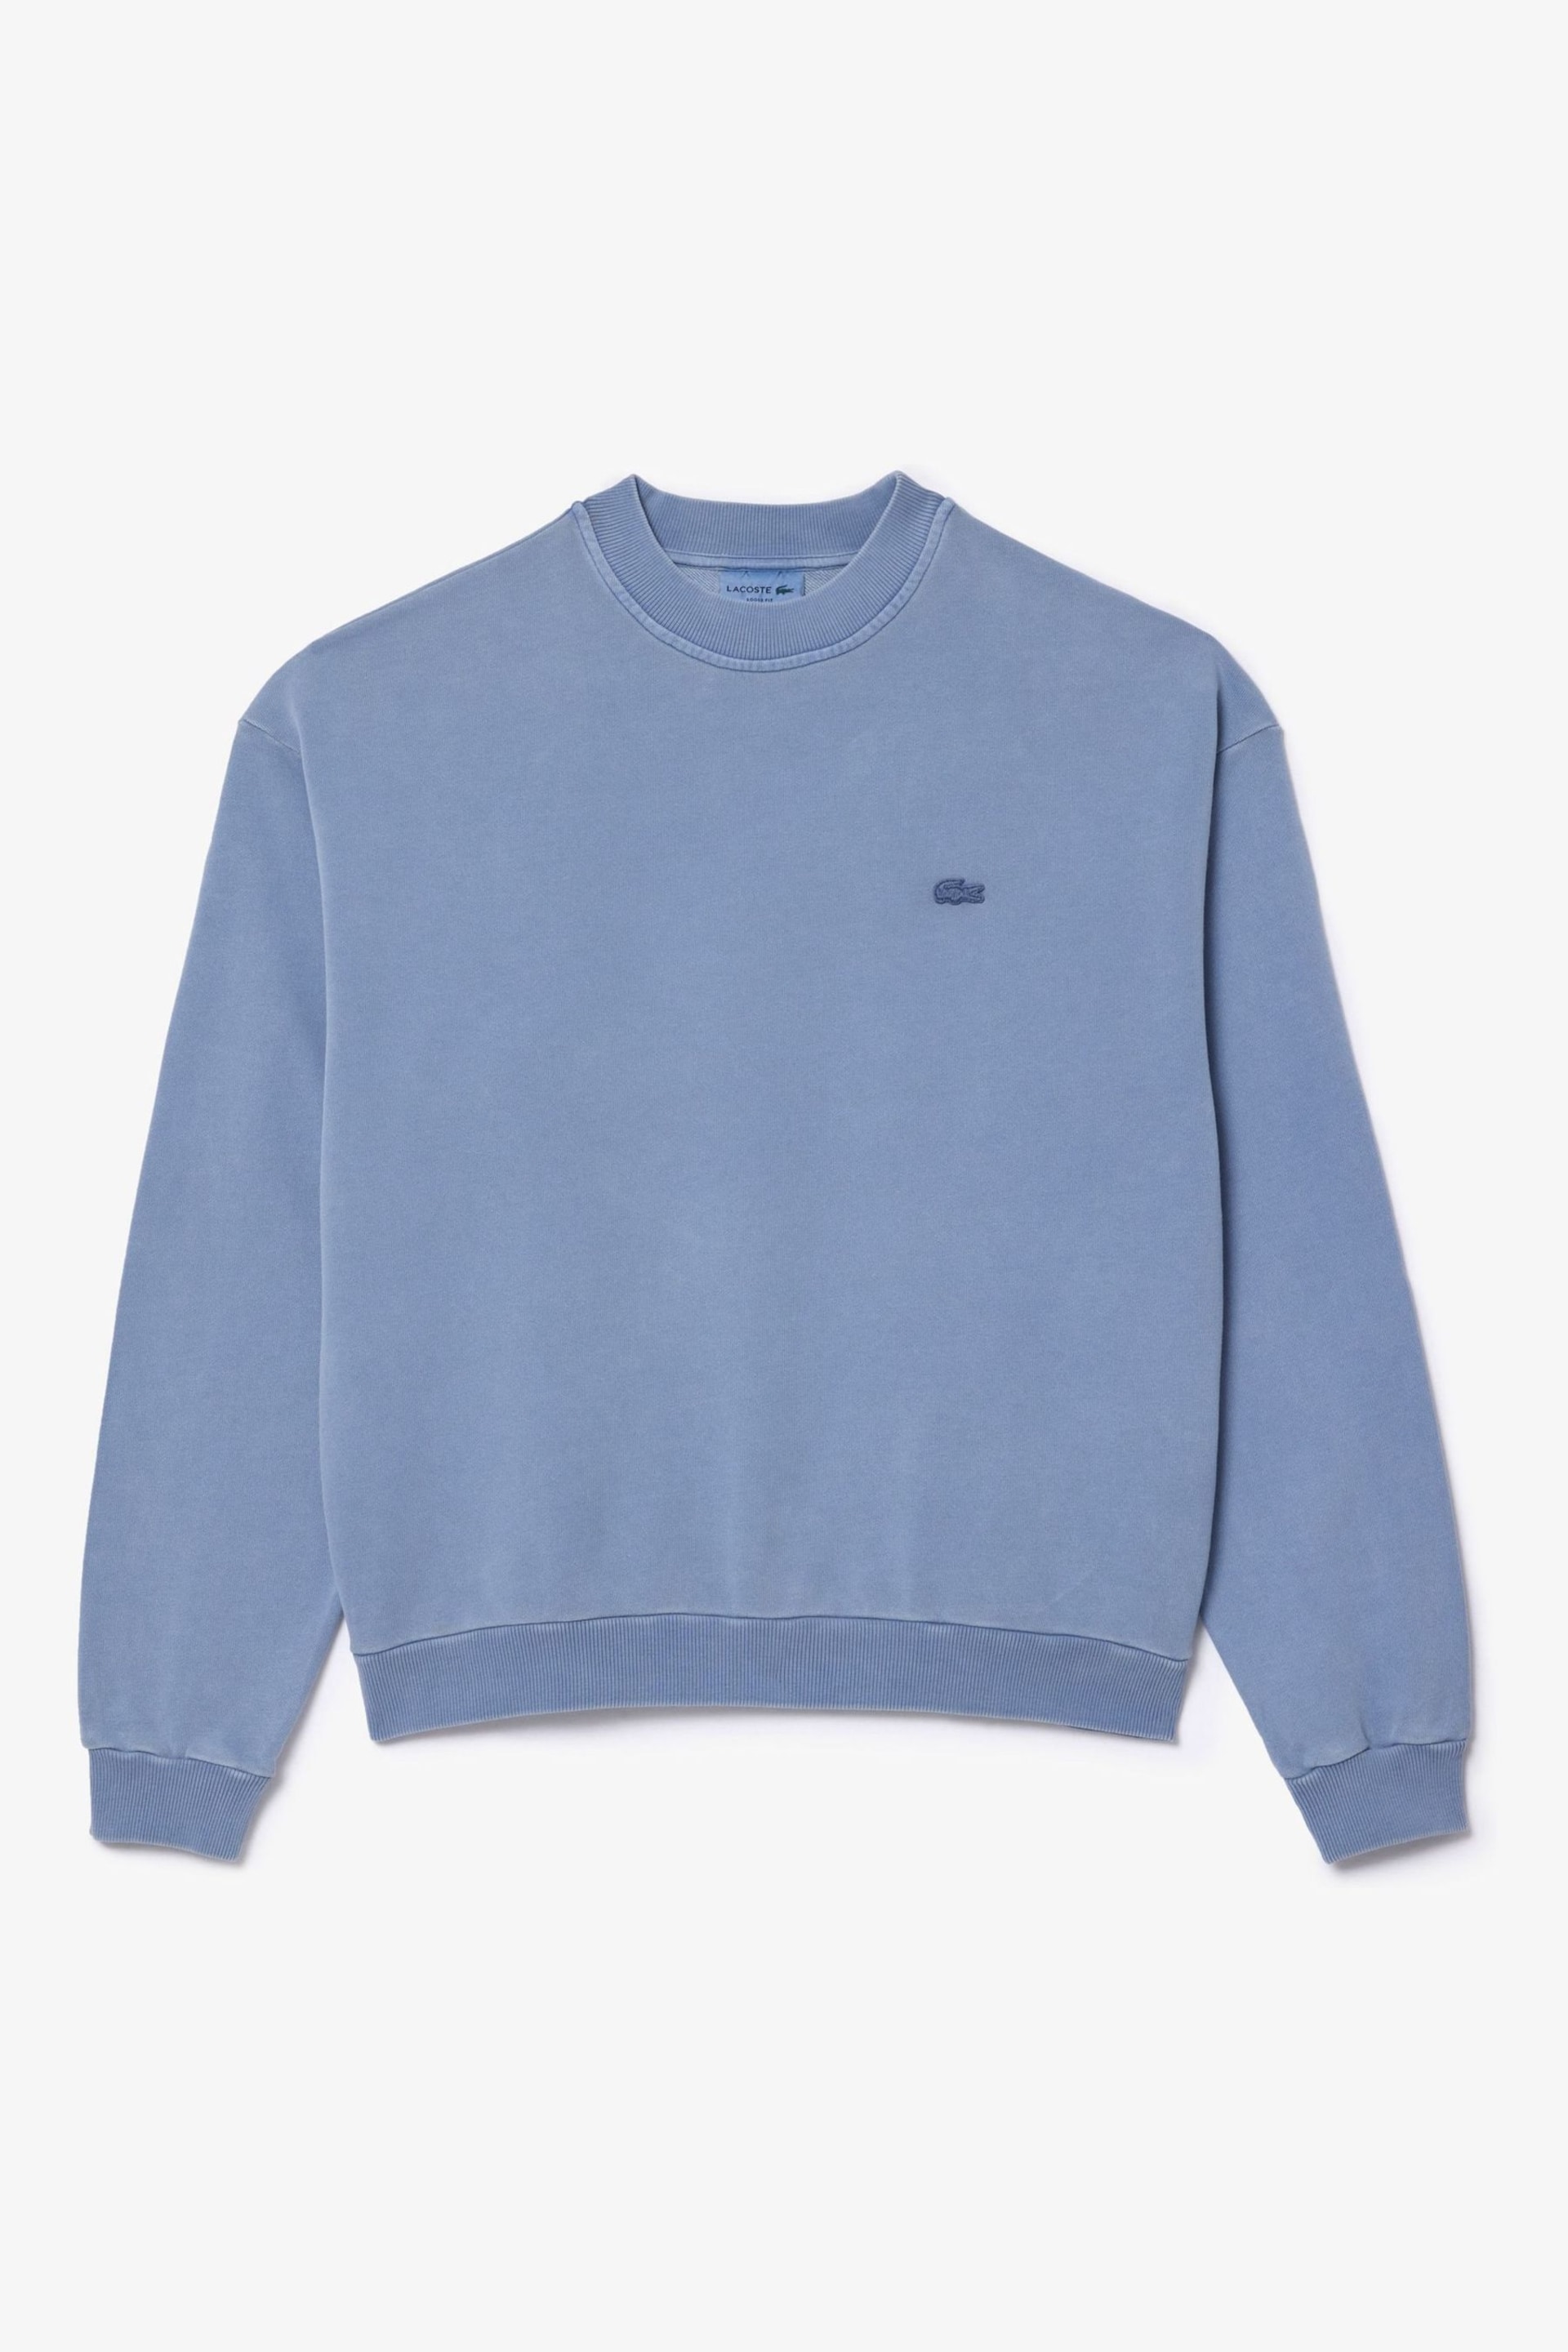 Lacoste Relaxed Fit Tonal Logo Jersey Sweatshirt - Image 5 of 6